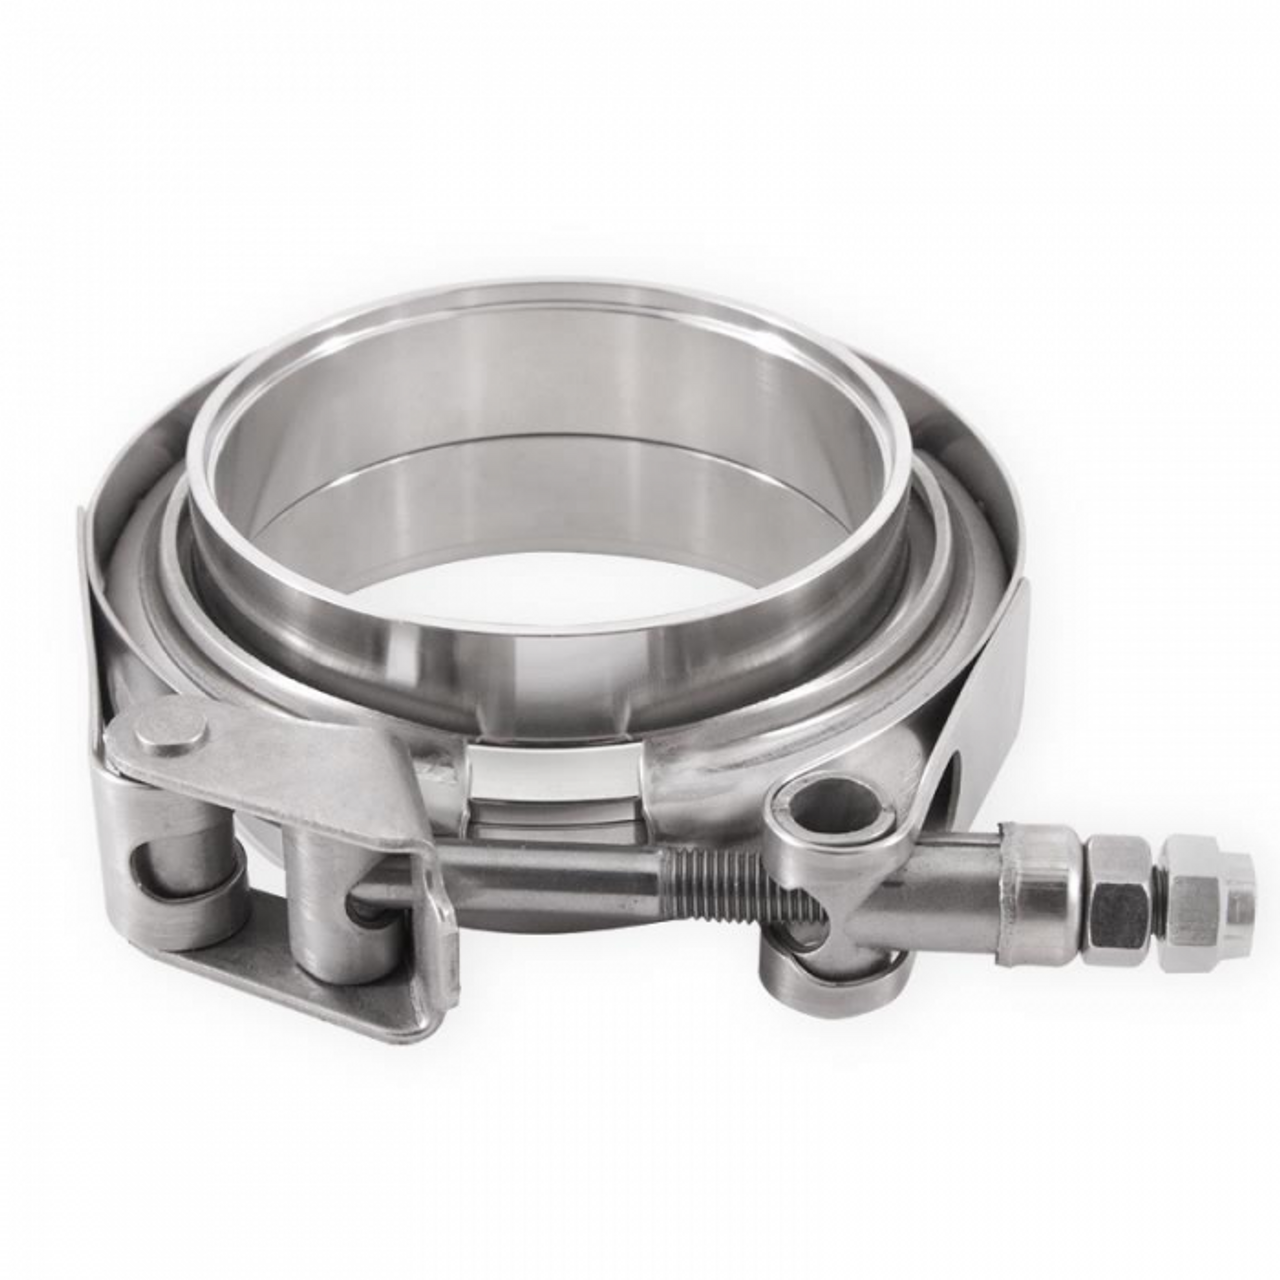 Mishimoto Stainless 2" V Band Clamp with Flange (Universal for 2" Connections) (MIMMCLAMP-VS-2-)Main View